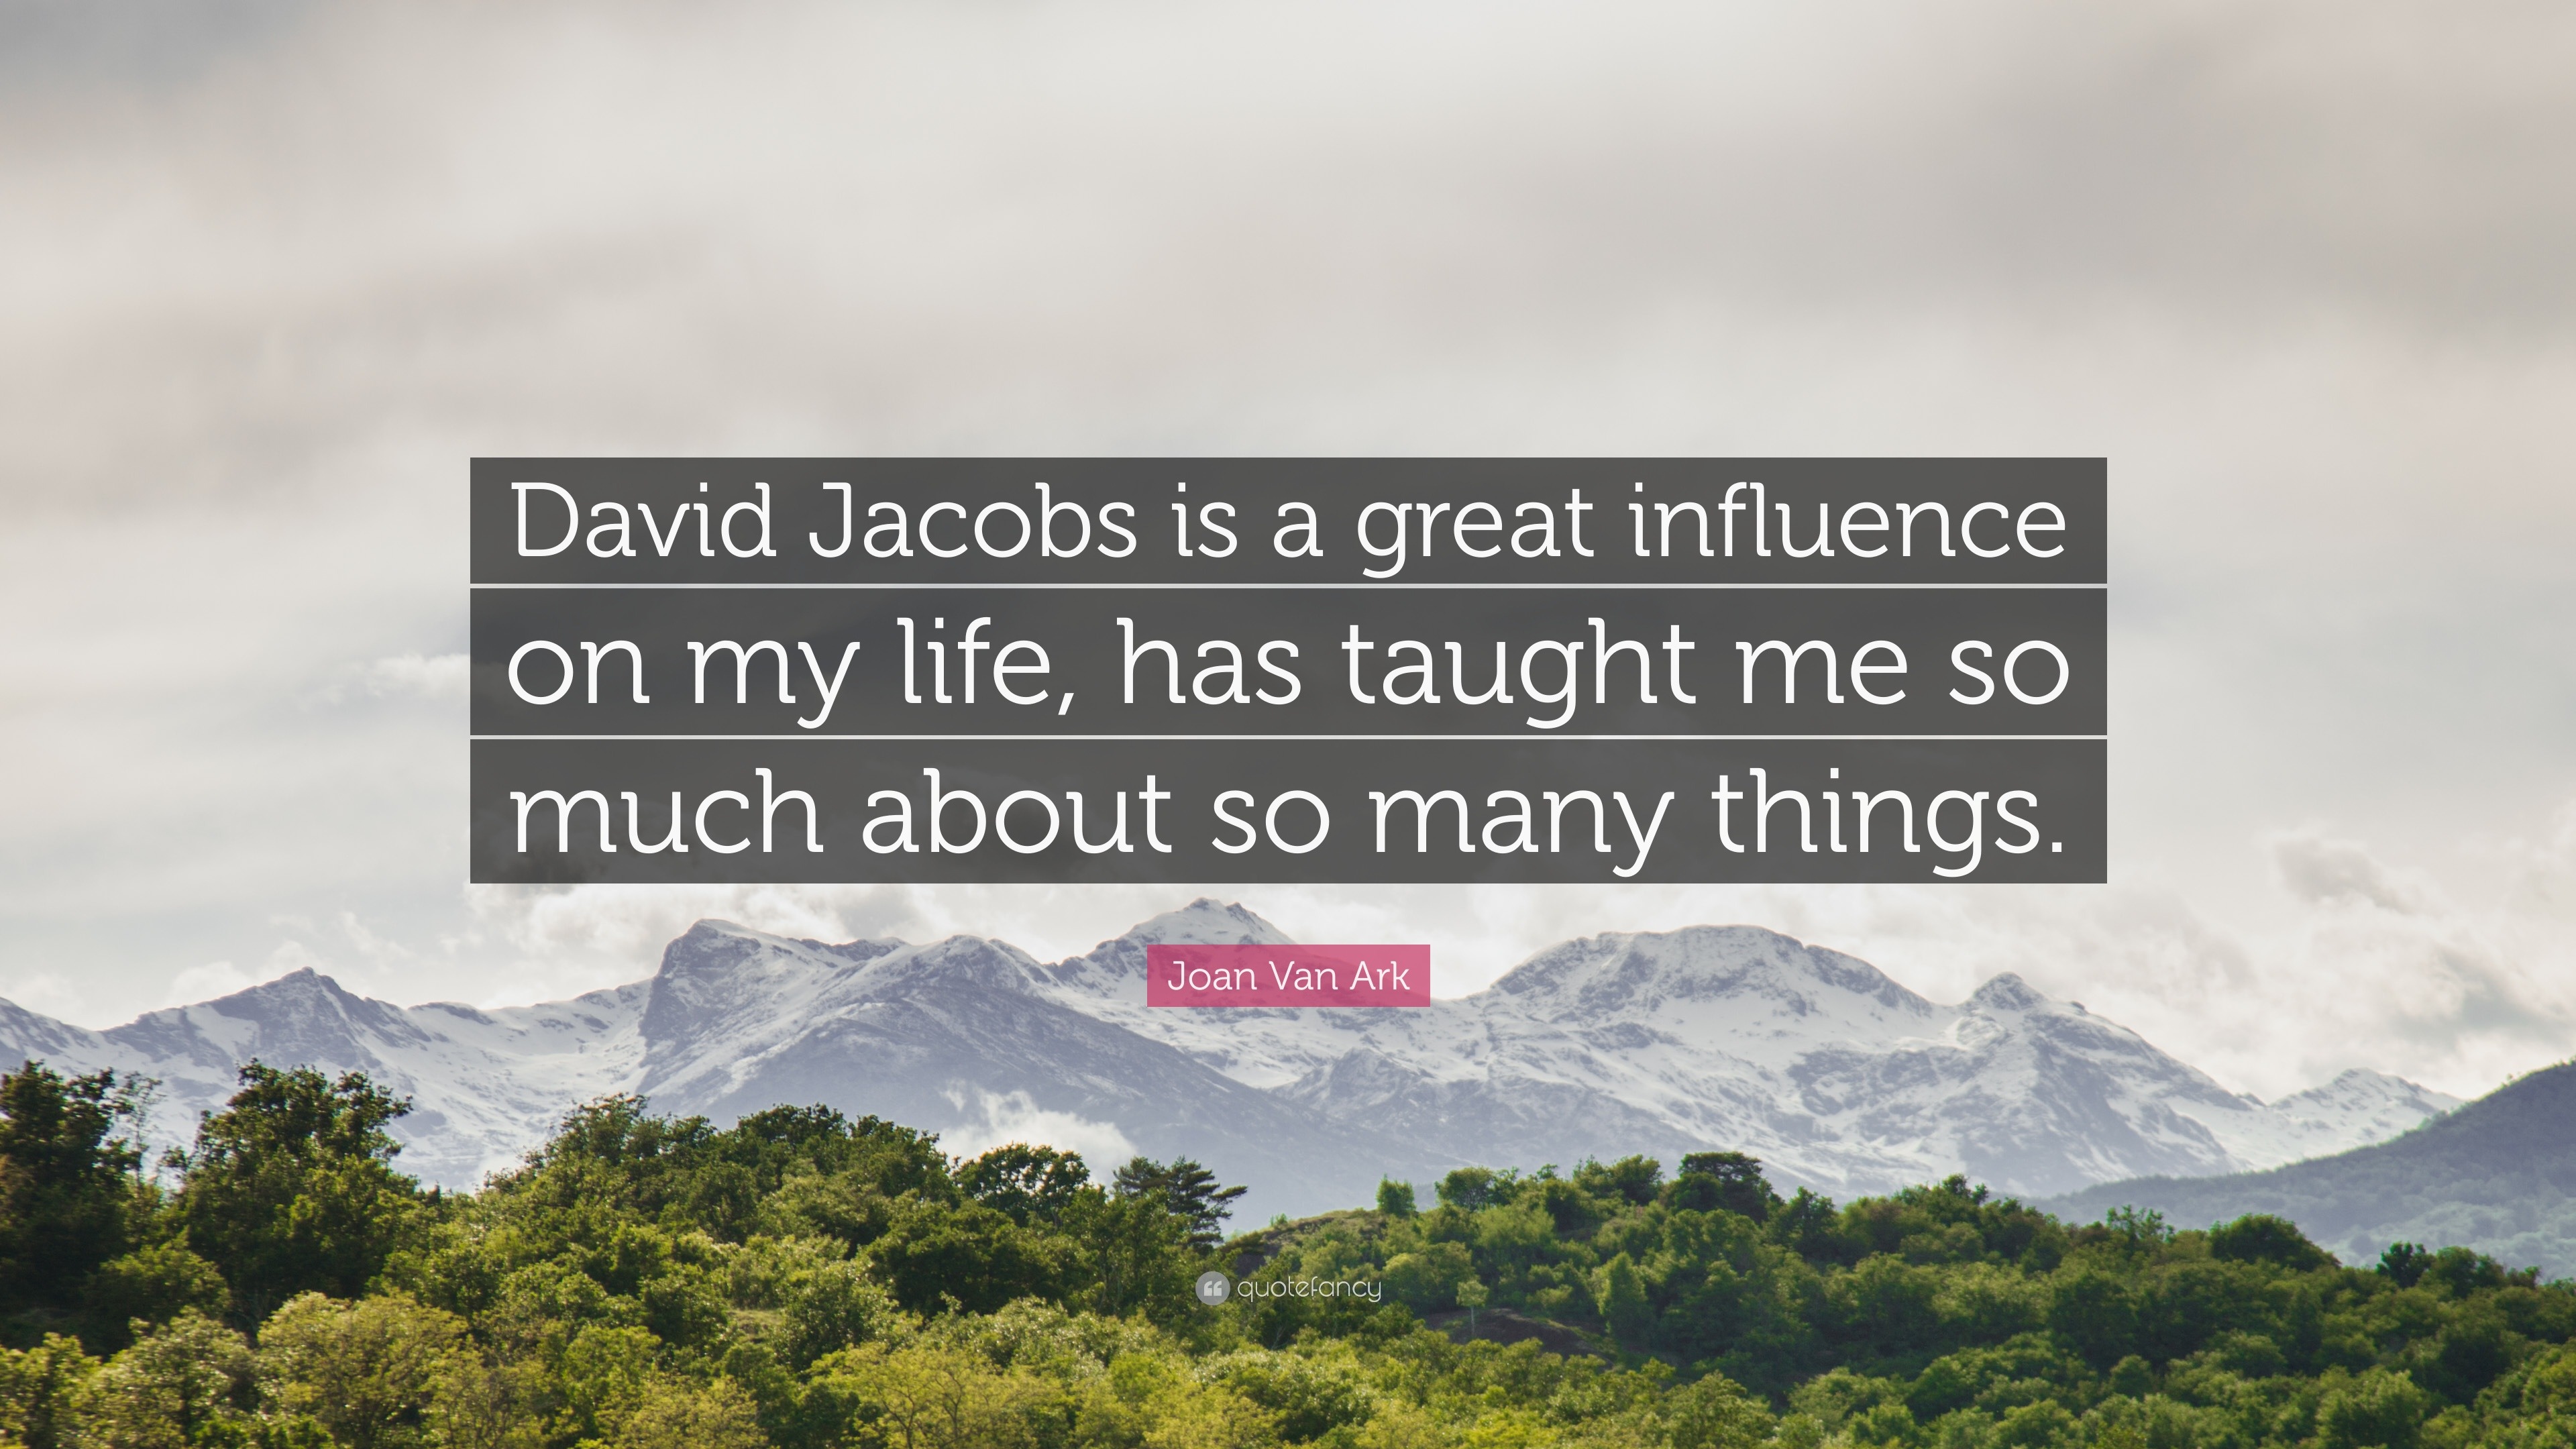 Joan Van Ark Quote “David Jacobs is a great influence on my life